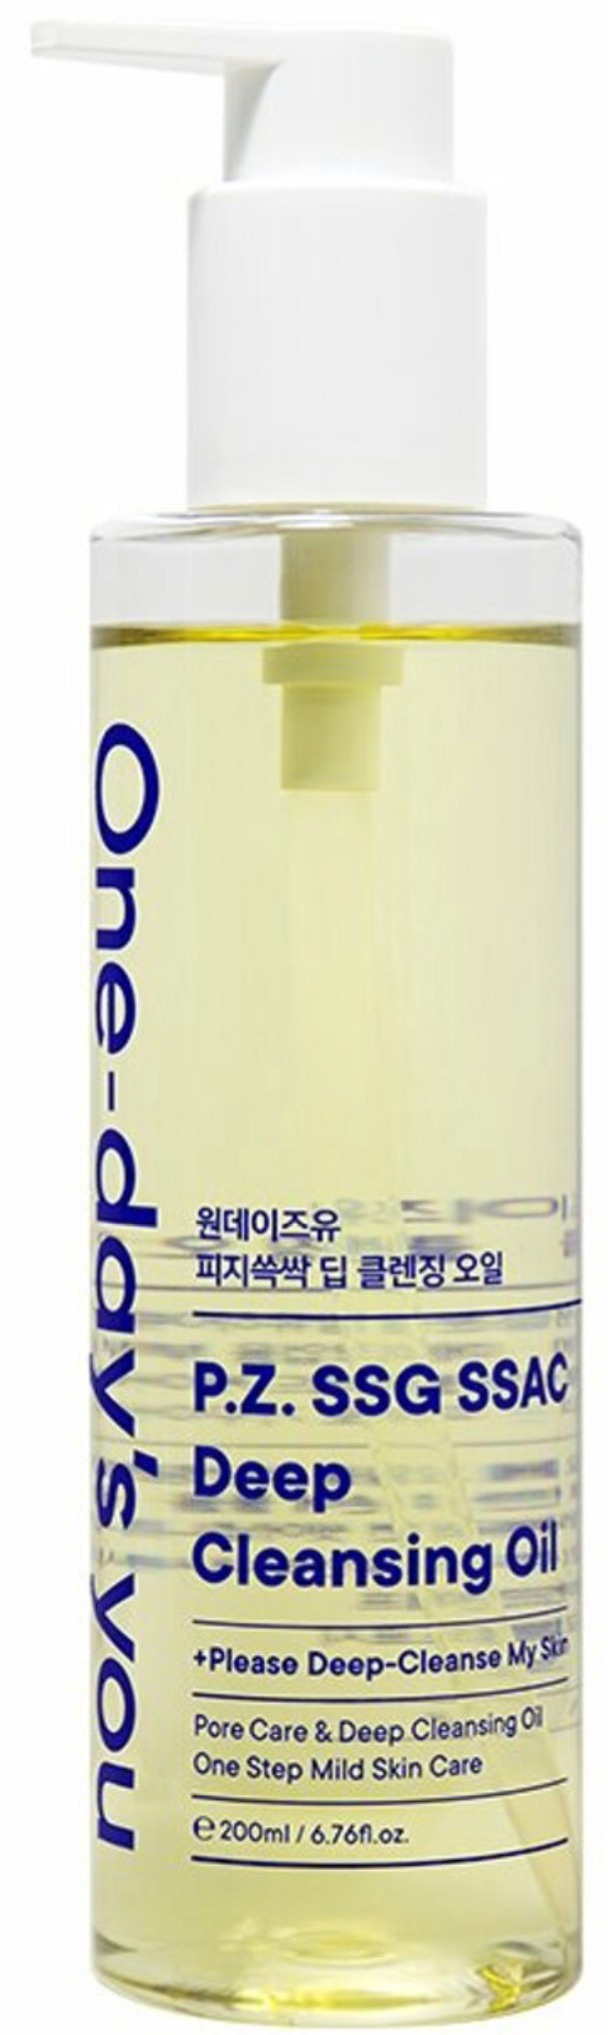 One-day's you P.z. Ssg Ssag Deep Cleansing Oil